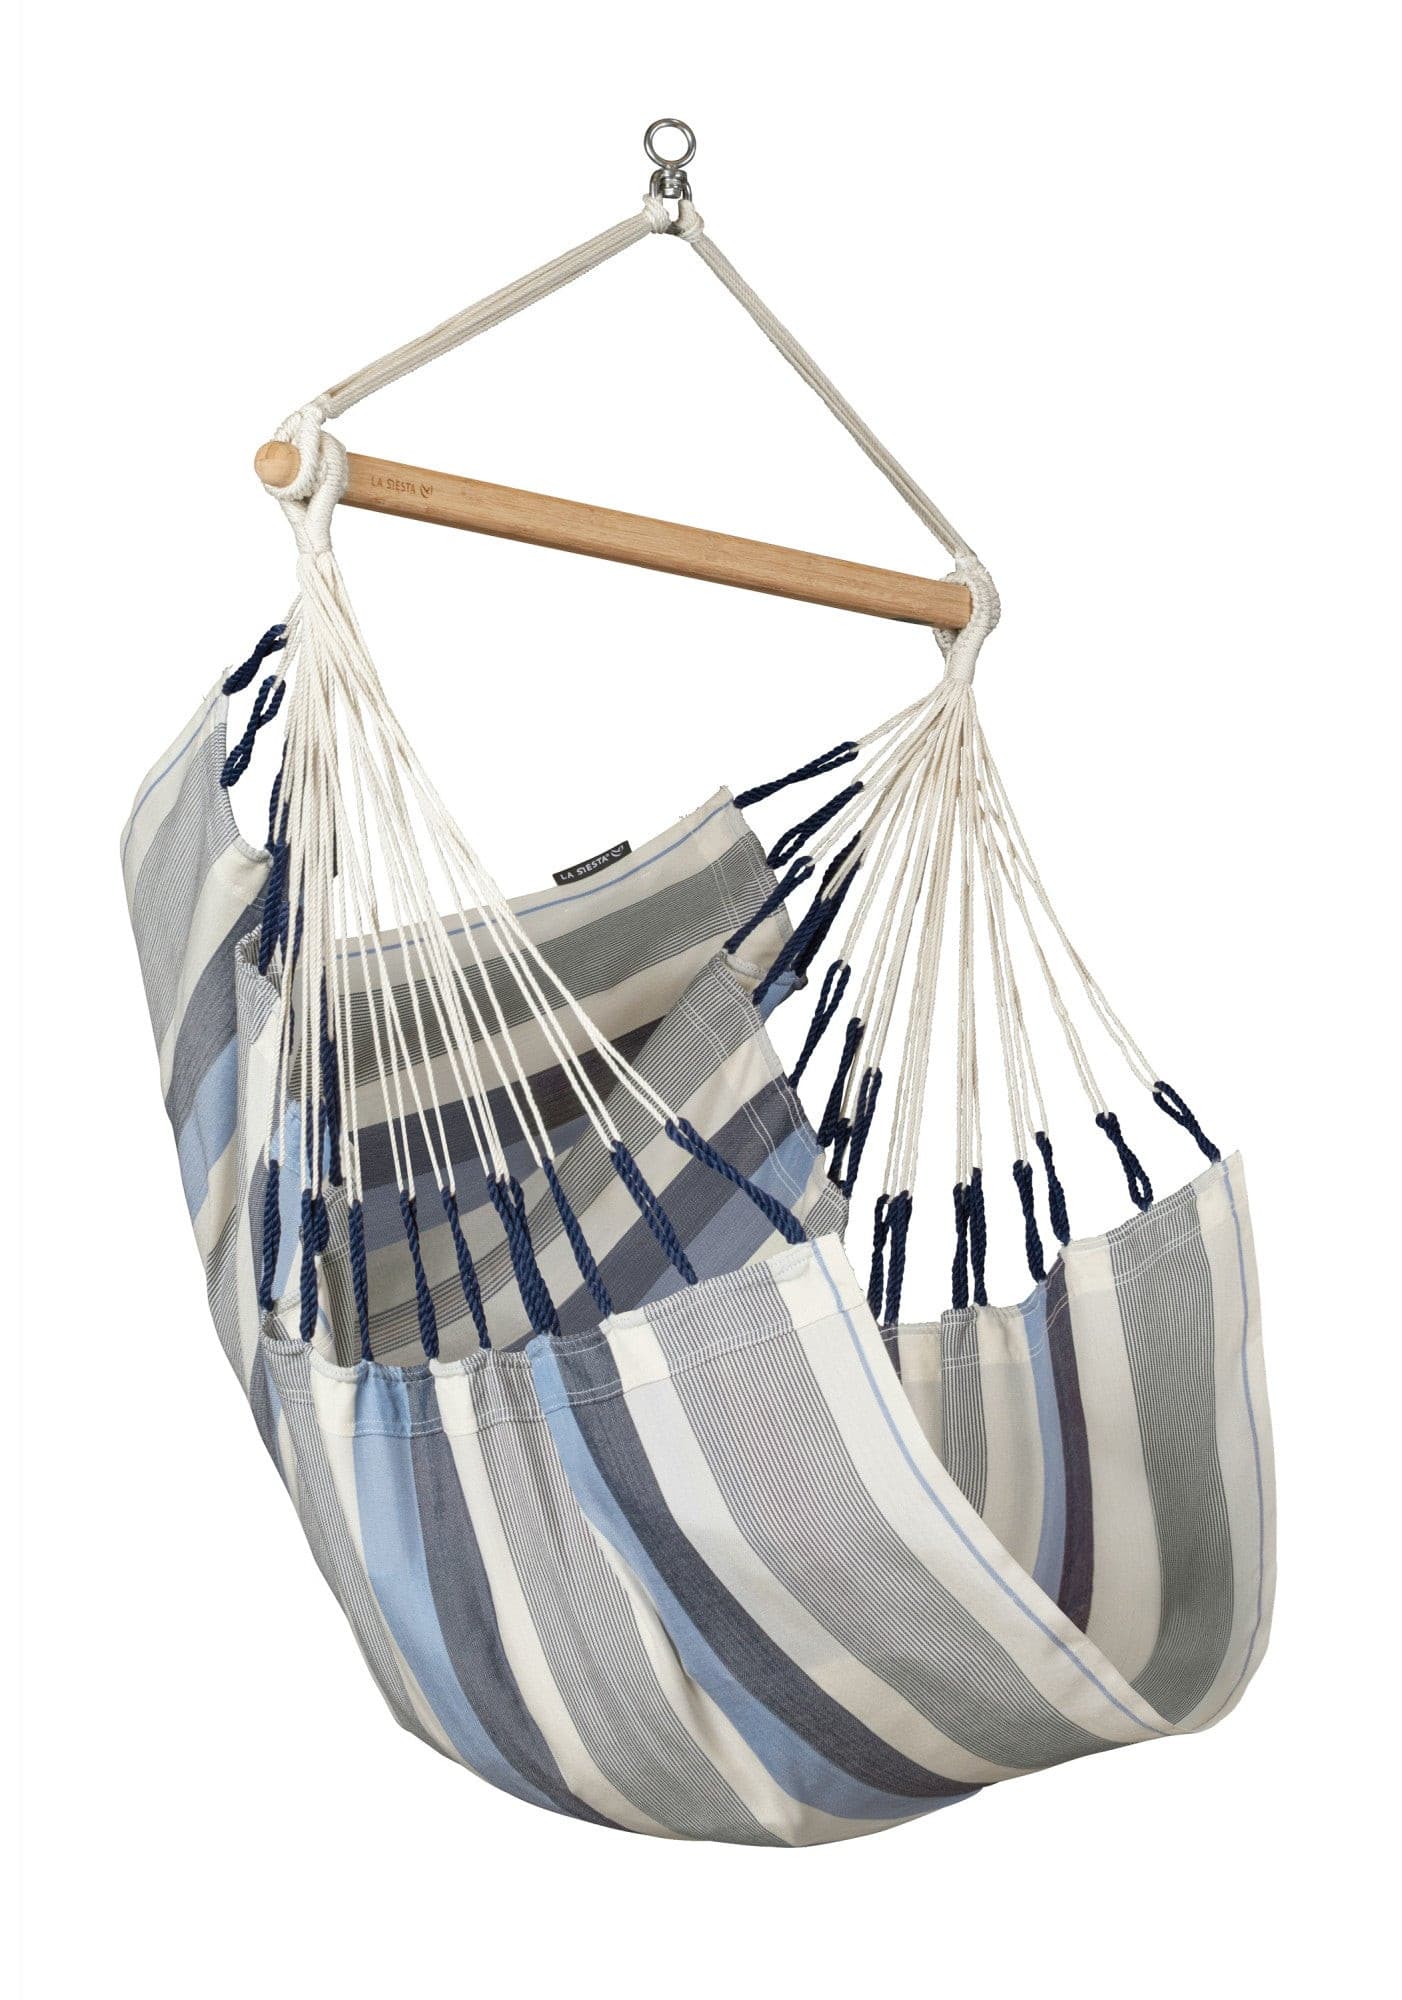 LA SIESTA CasaMount Black- Multipurpose Suspension for Hammock Chairs and  Hanging Nests at